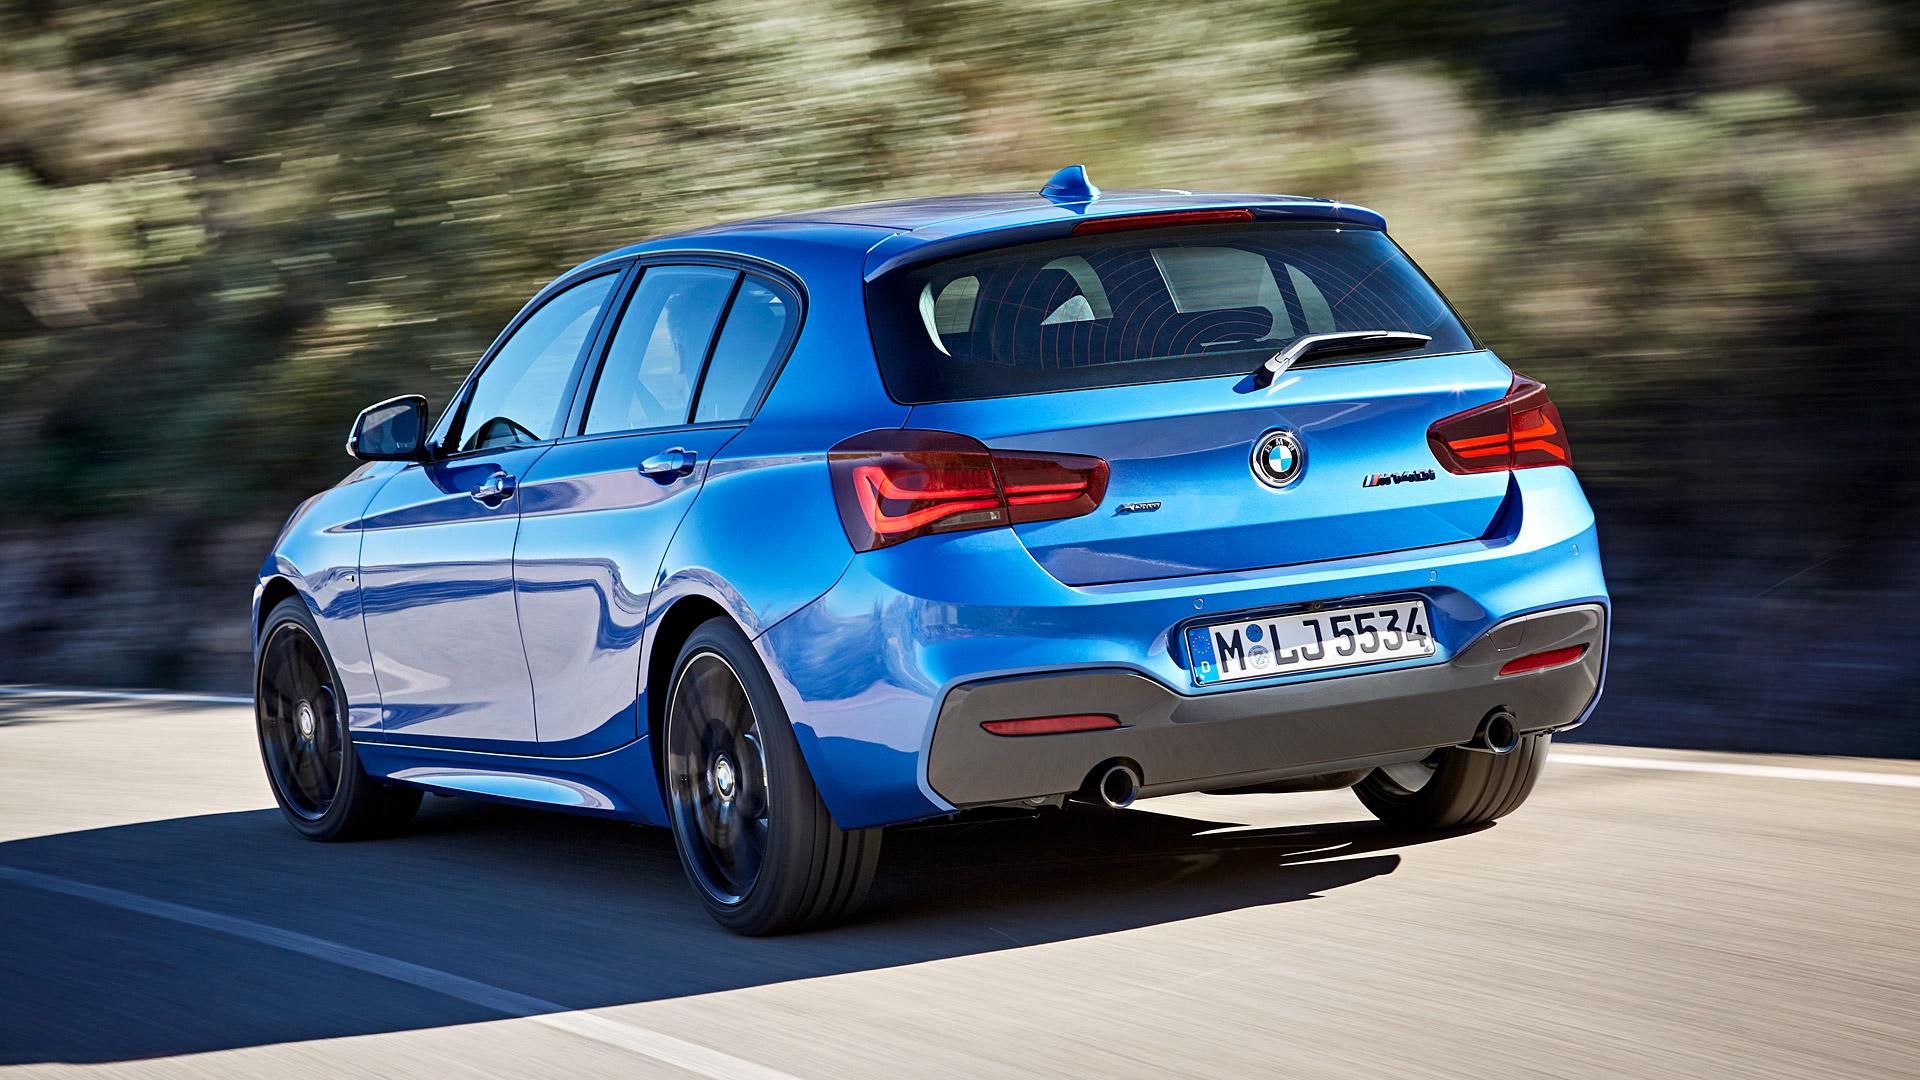 BMW M140i MG1CS003 Stage 2 428HP 613NM by ChiptuneRS